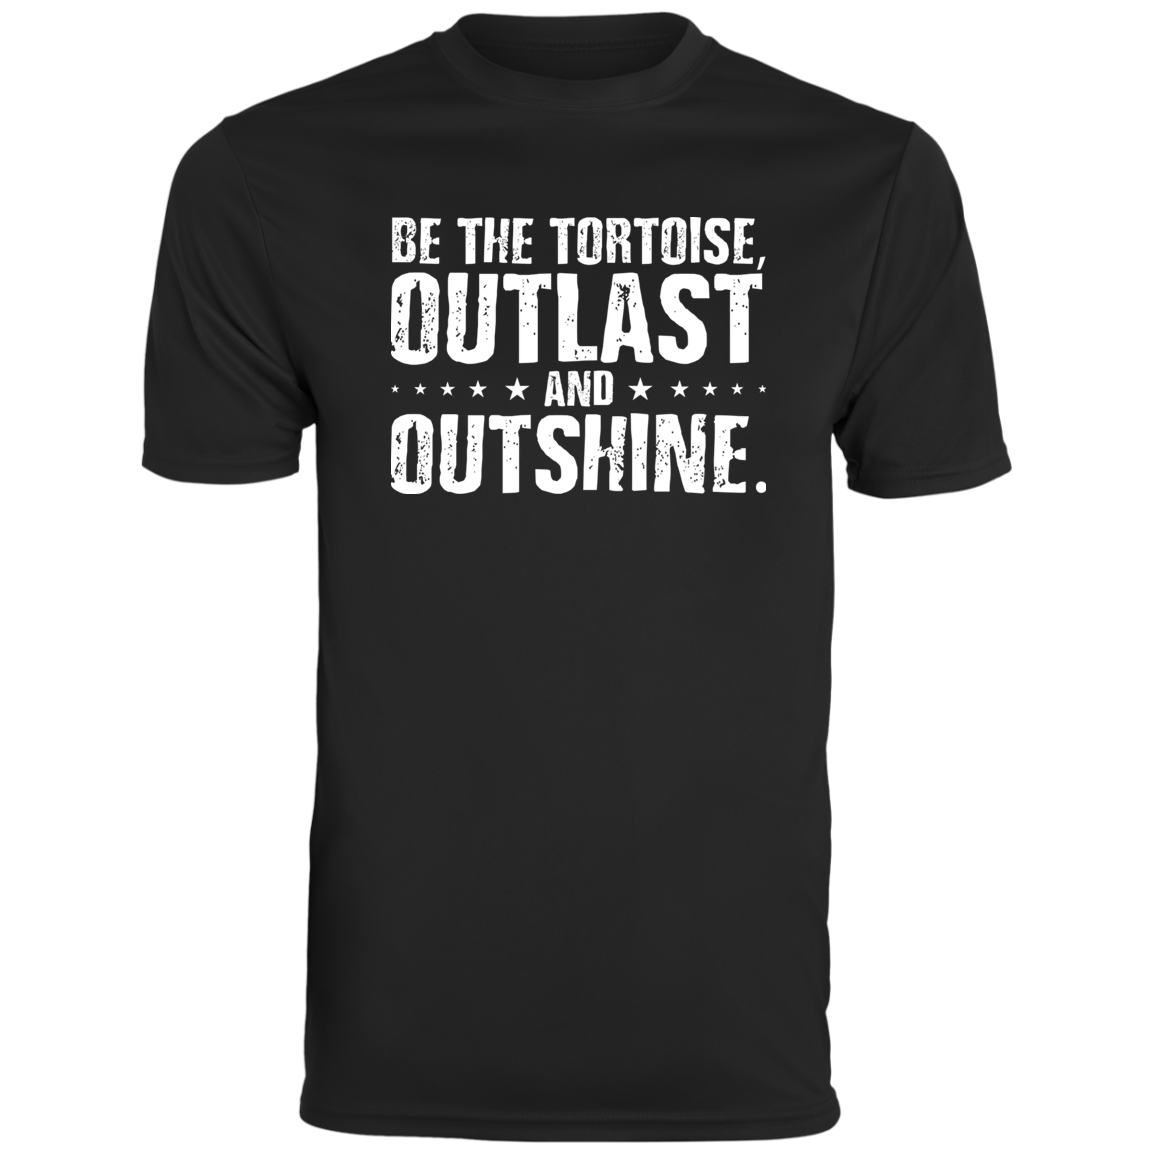 Men's Inspirational Top Be the tortoise, outlast and outshine